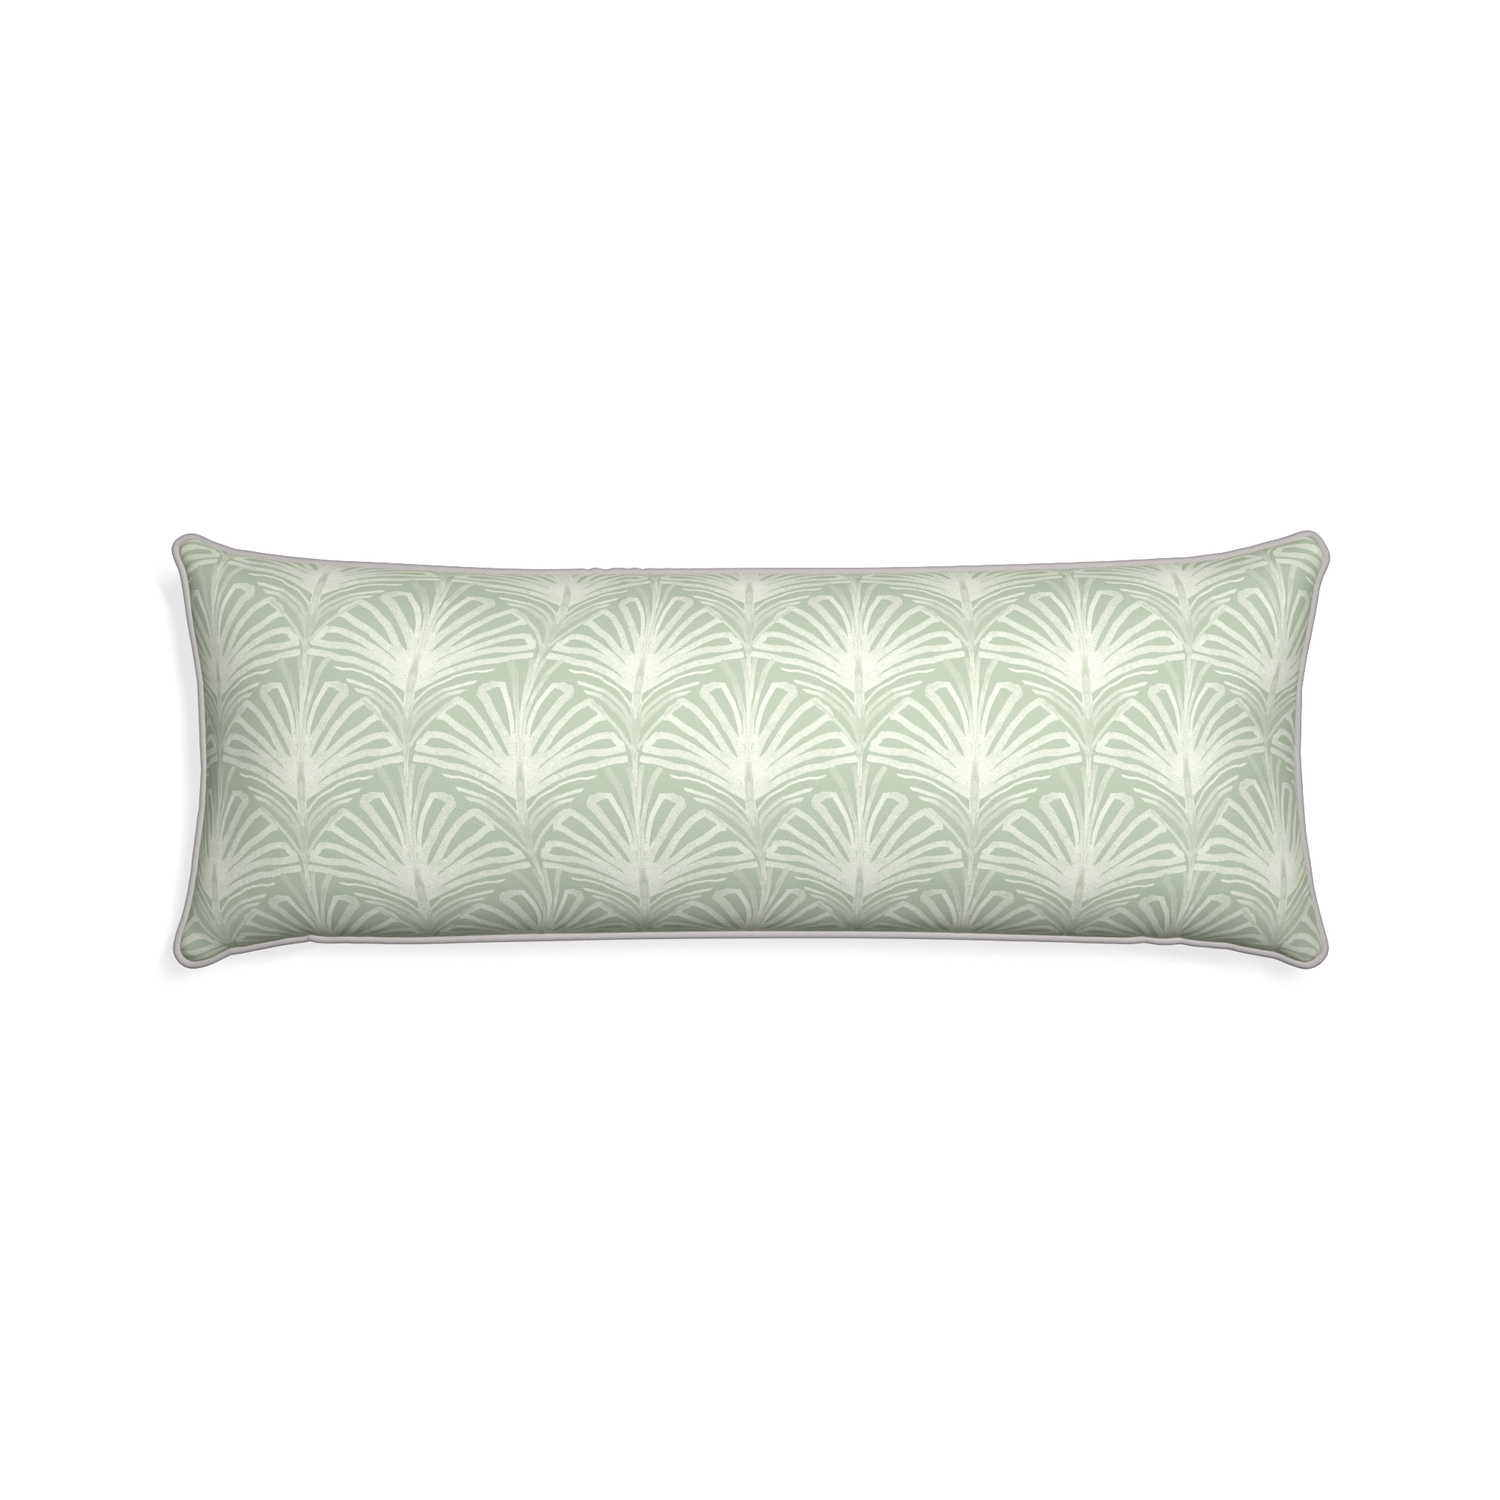 Xl-lumbar suzy sage custom sage green palmpillow with pebble piping on white background